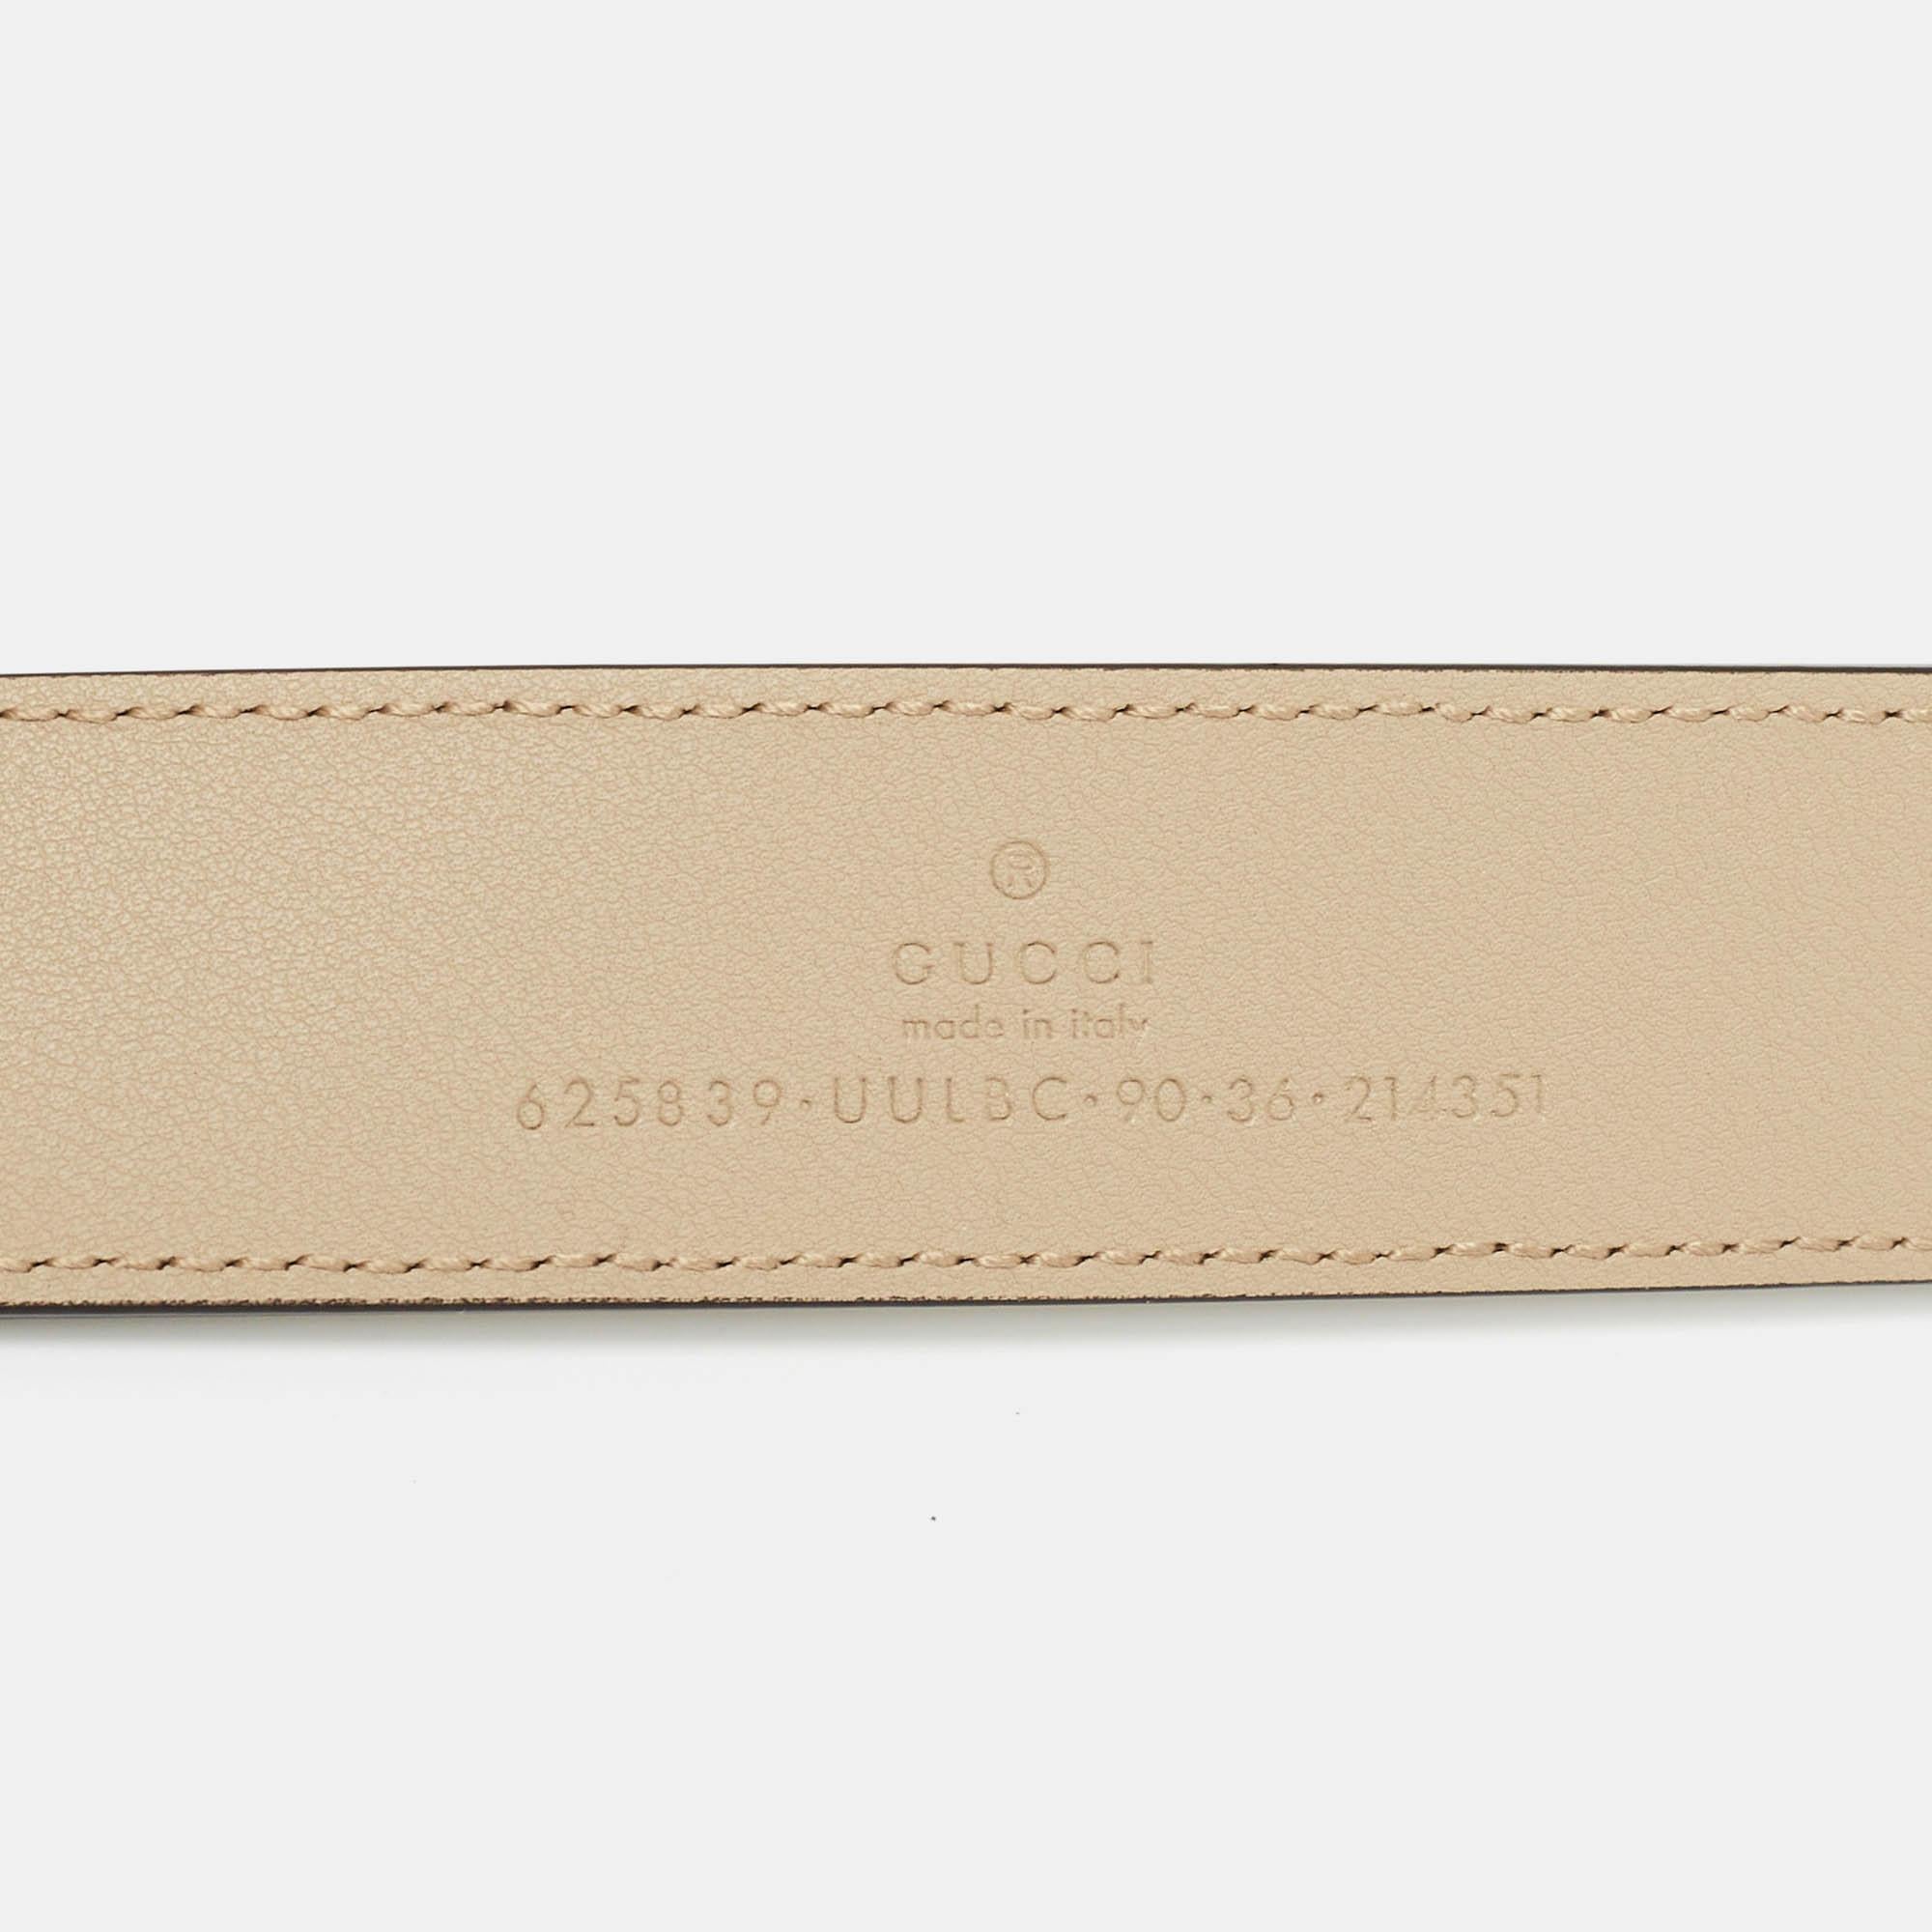 The Marmont belt from Gucci has found a fan in women around the globe and it's time you get one for yourself too! This chic belt comes crafted from canvas and leather and features the iconic GG buckle in gold-tone. It is sure to lend your dresses,